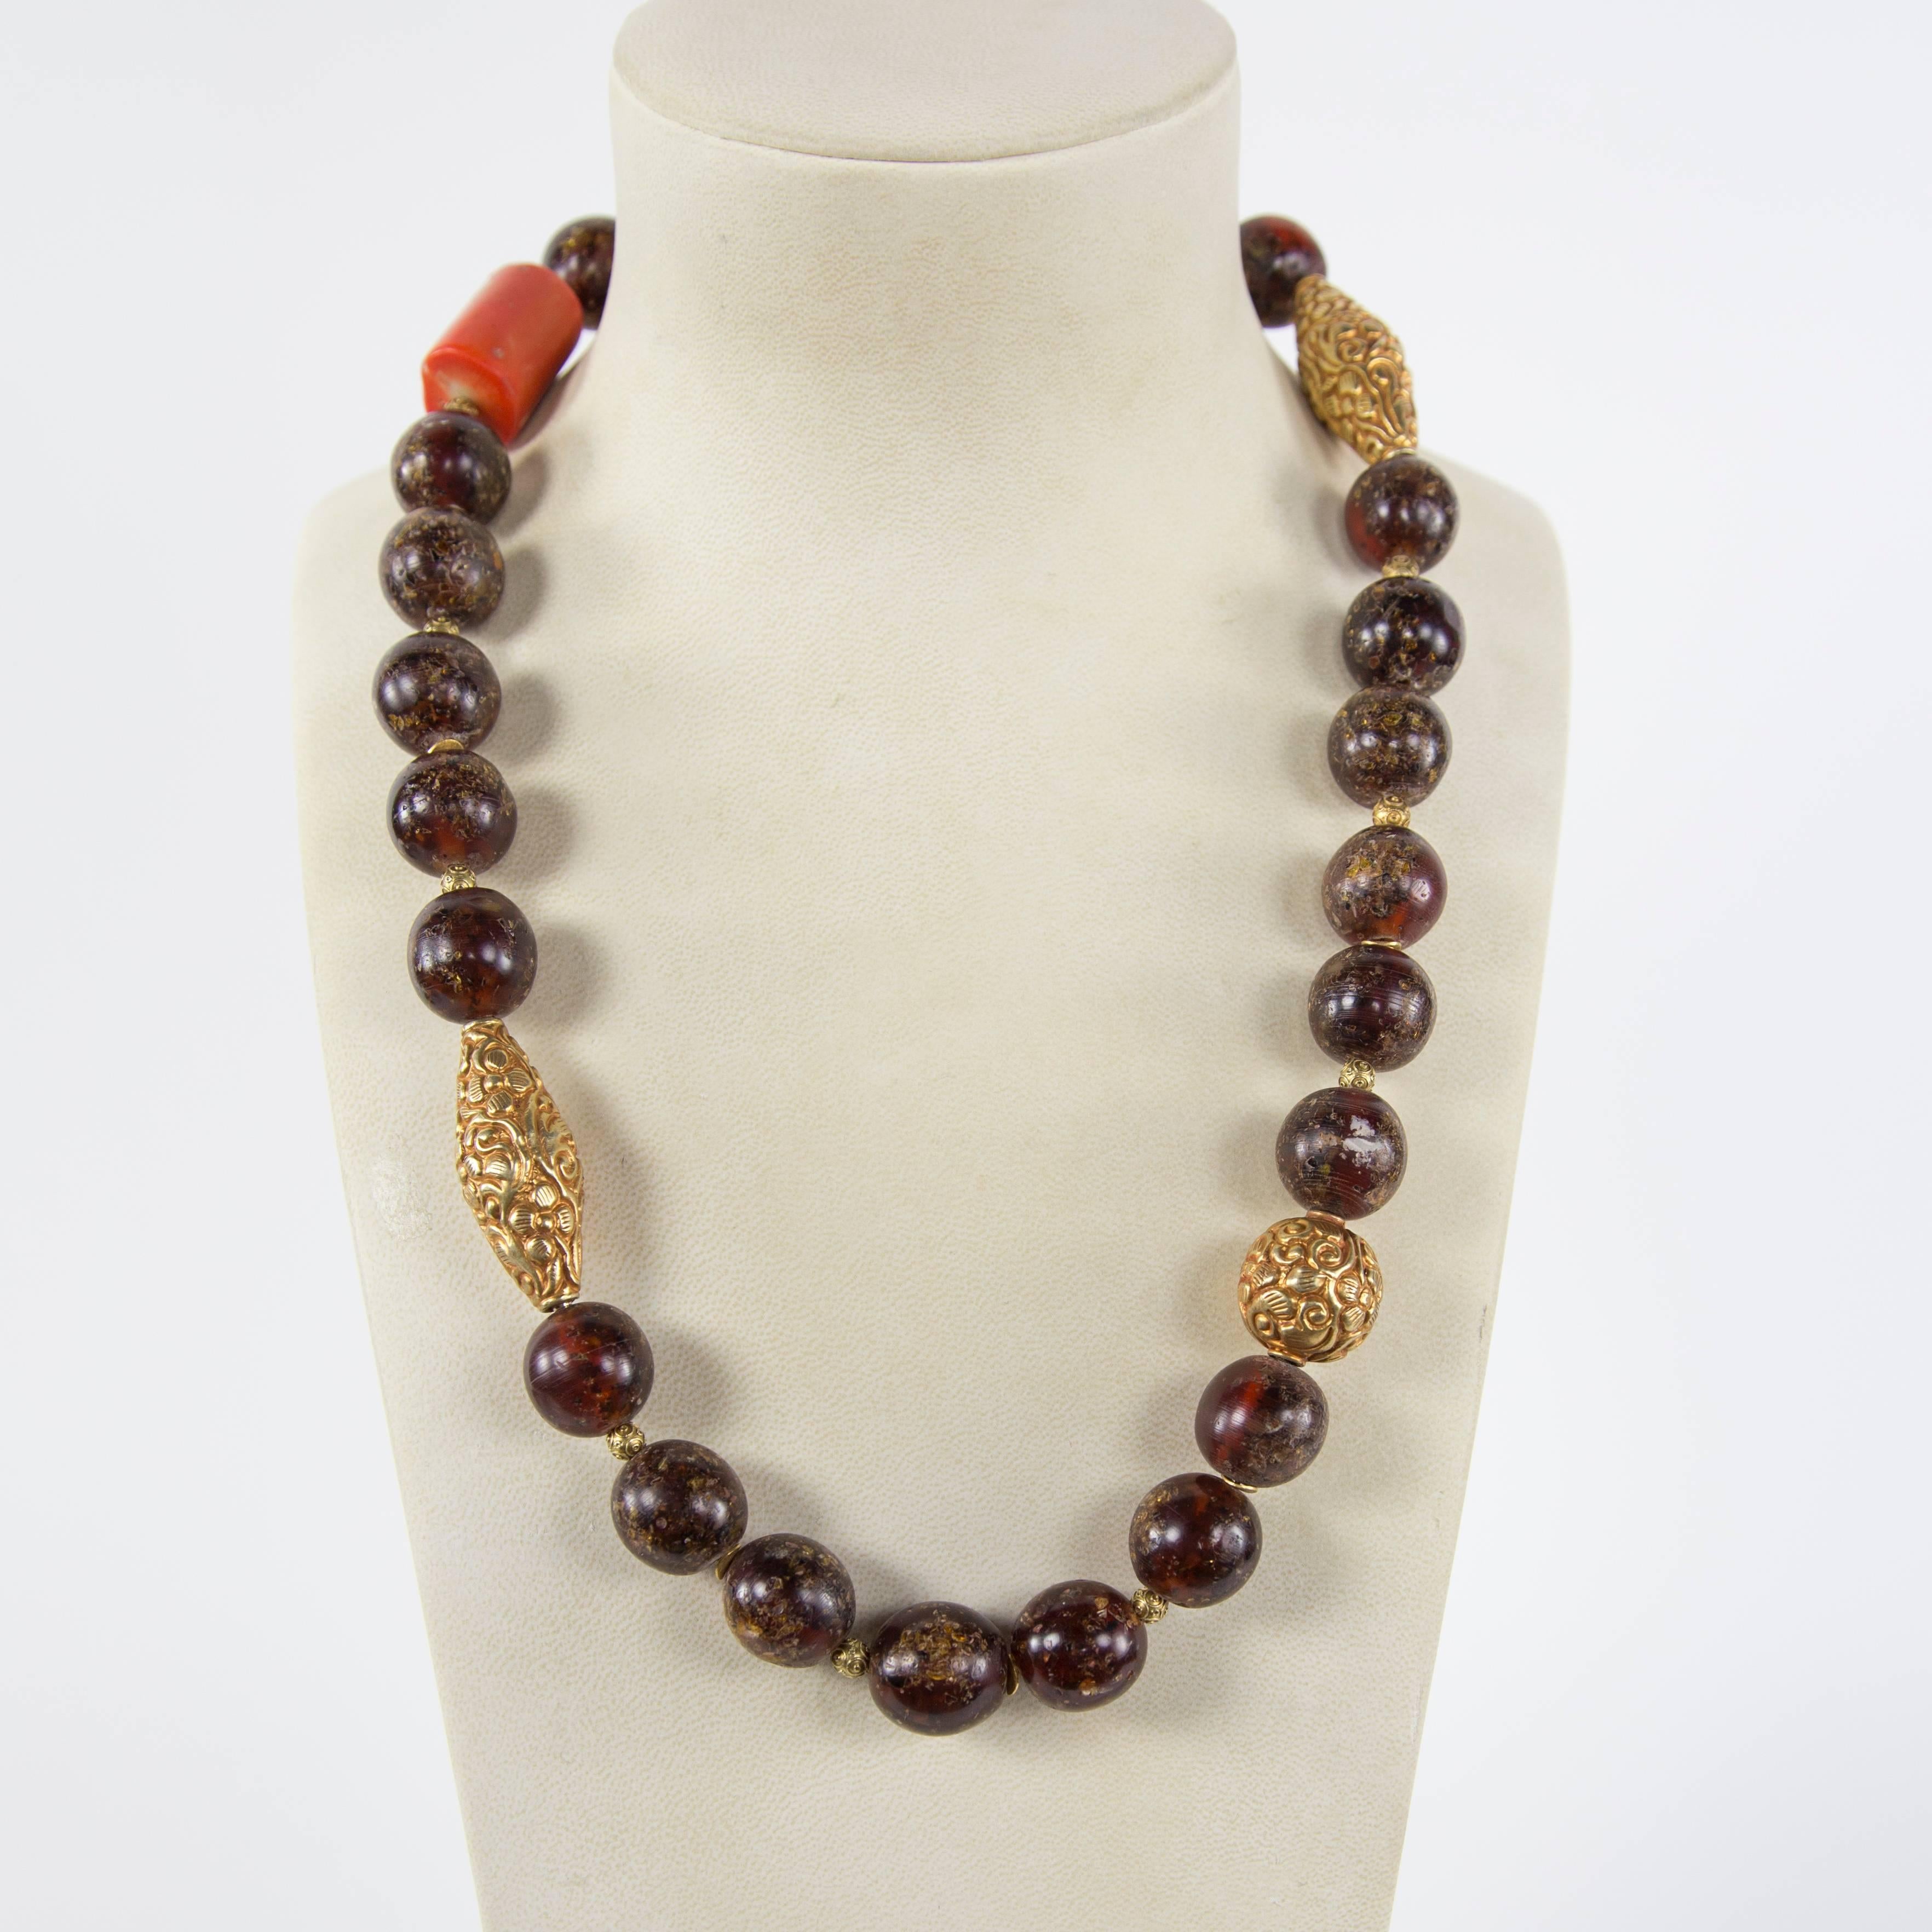 Rare Large Tibetan Natural Copal Amber, Coral and Gold bead Estate Necklace…Beautiful in its simplicity! Length of necklace 28”; 1 coral bead, approx. 1.25” long x .75” diameter; 25 amber beads; each approx. 19mm-20mm and 3 gilt brass beads.